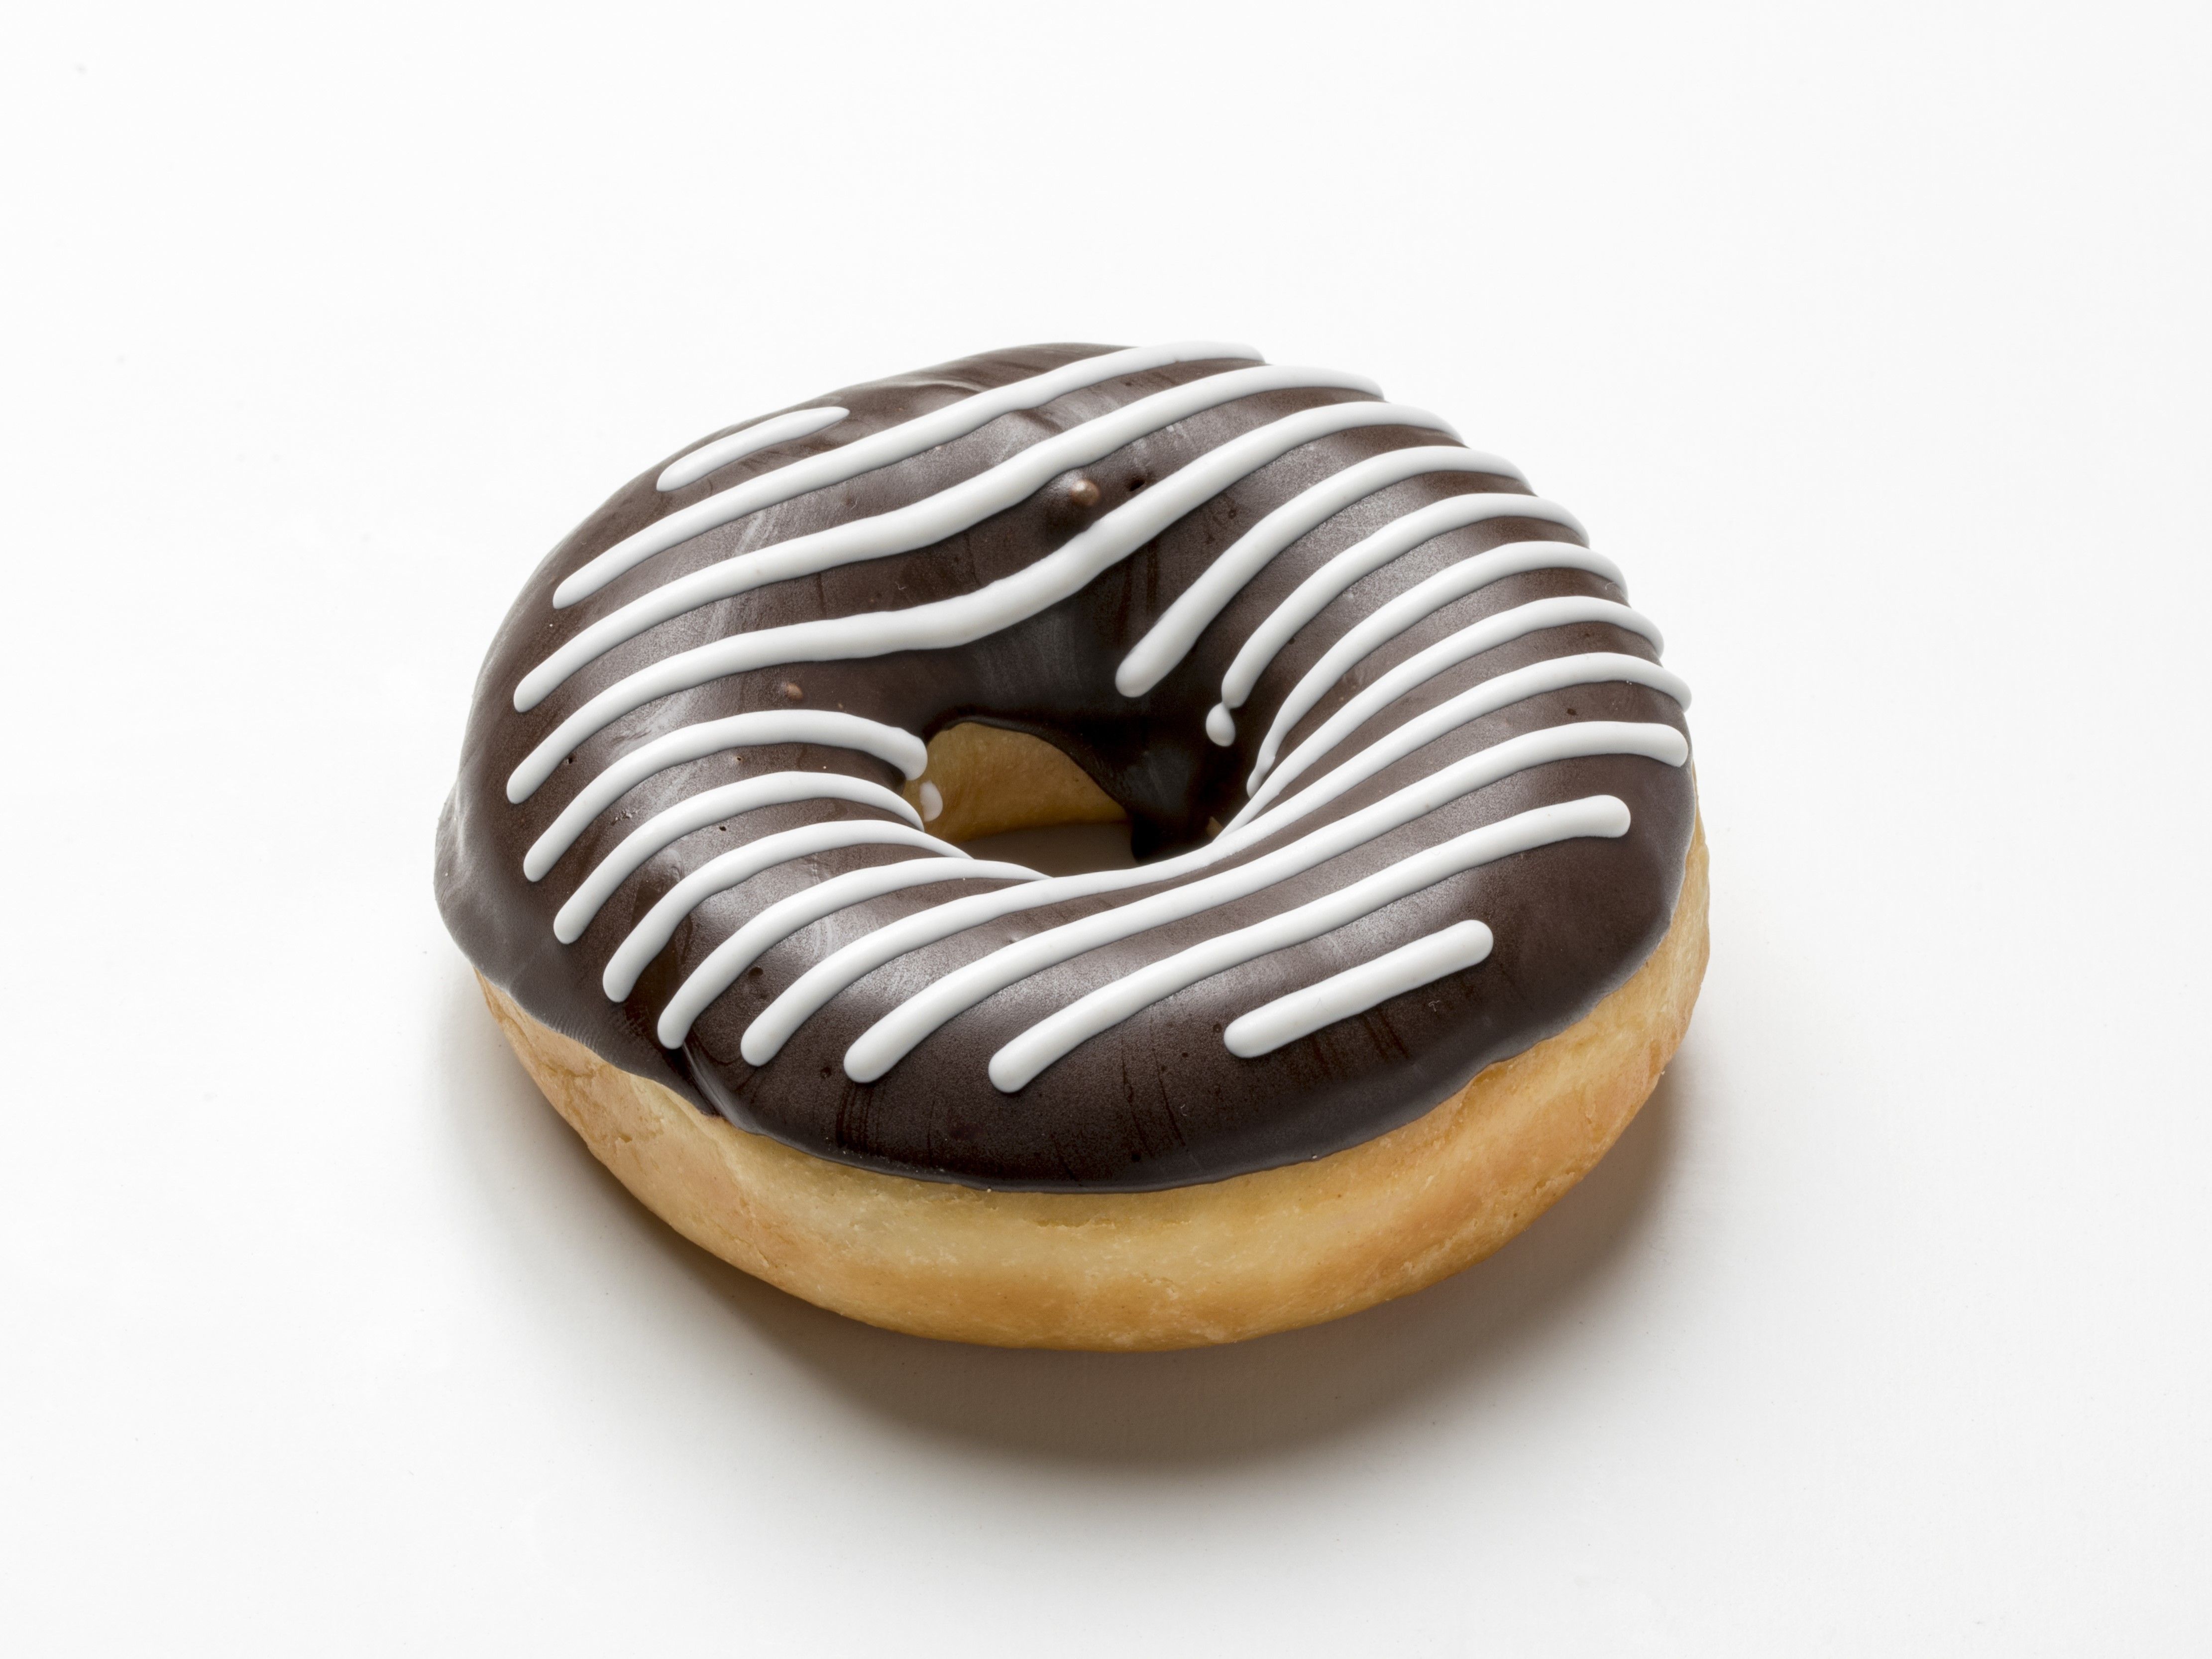 Donut decorated with dark and white chocolate in a pattern